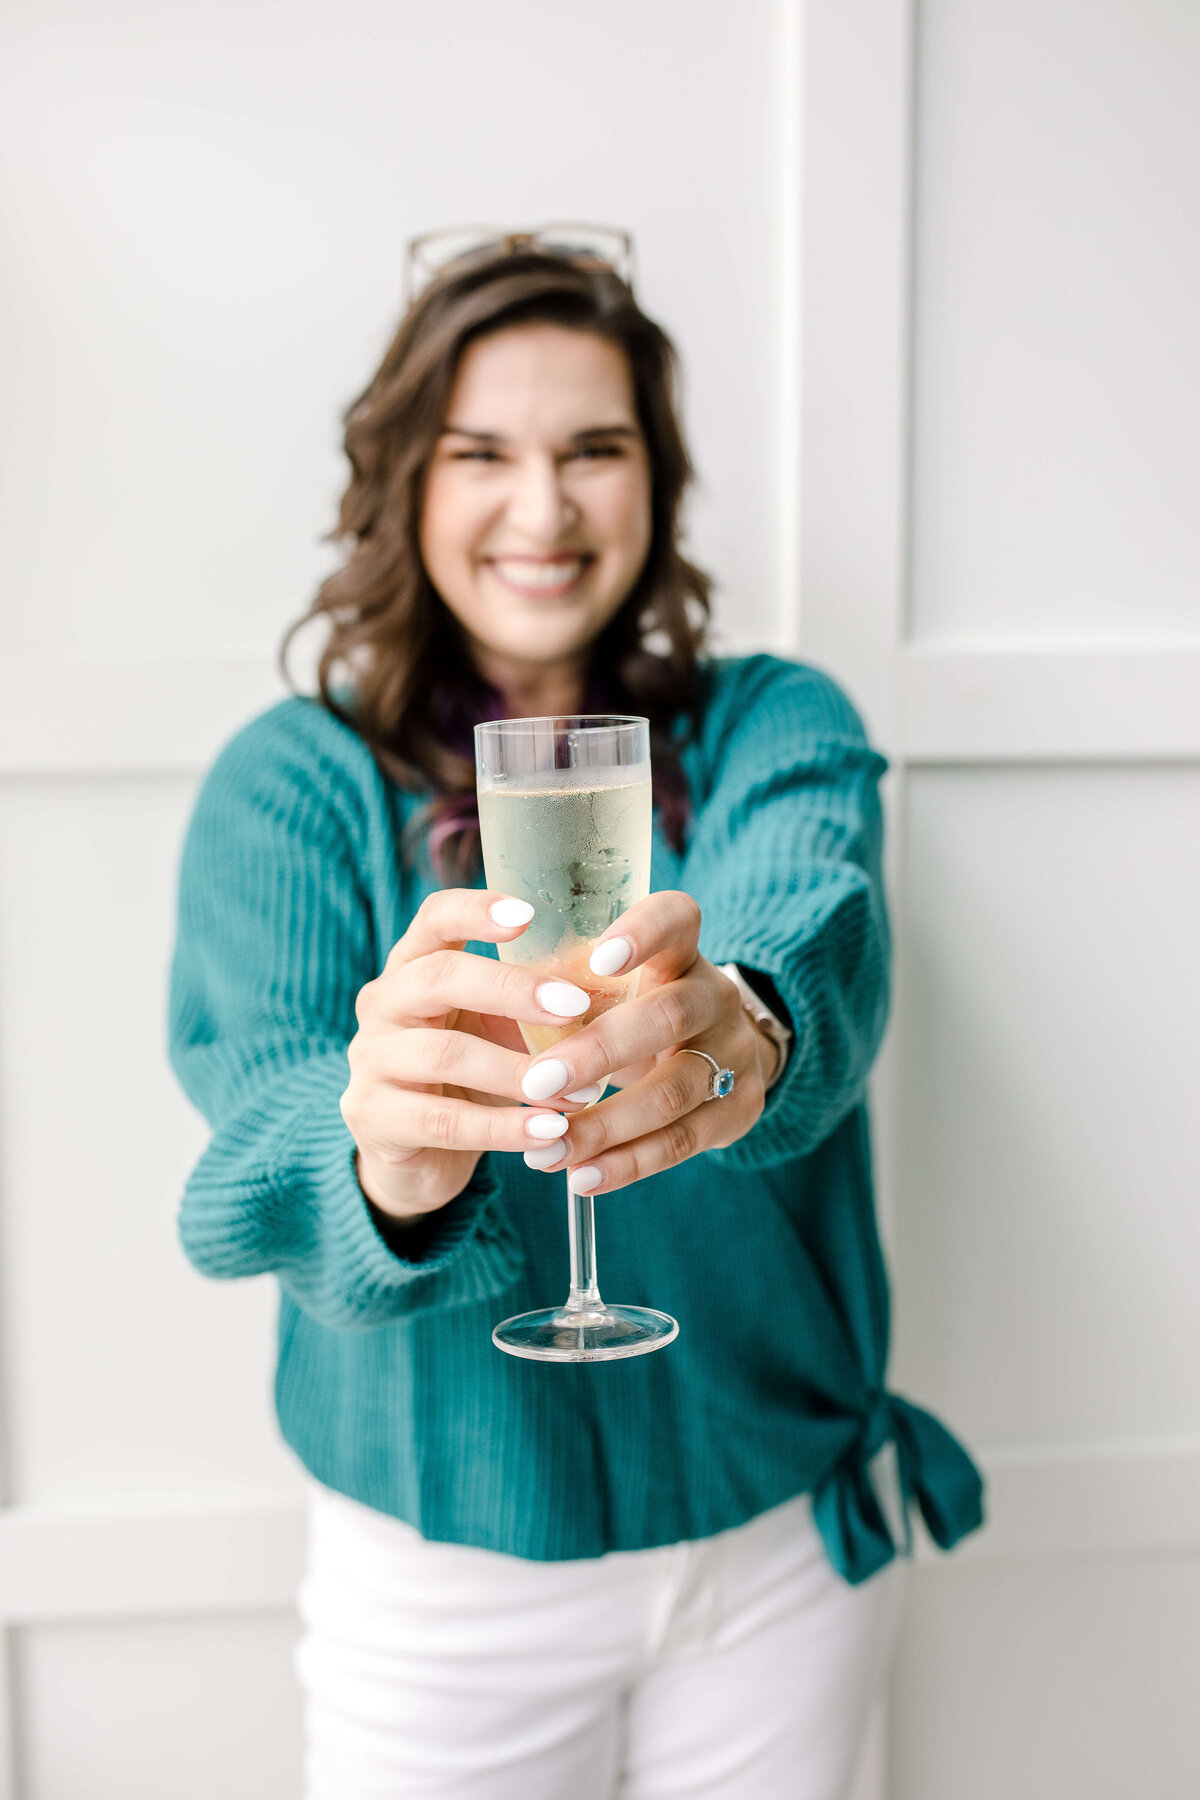 Brand photographer near me photographs woman in a teal blouse holding out a glass of champagne with both of her hands while smiling for unique brand photo